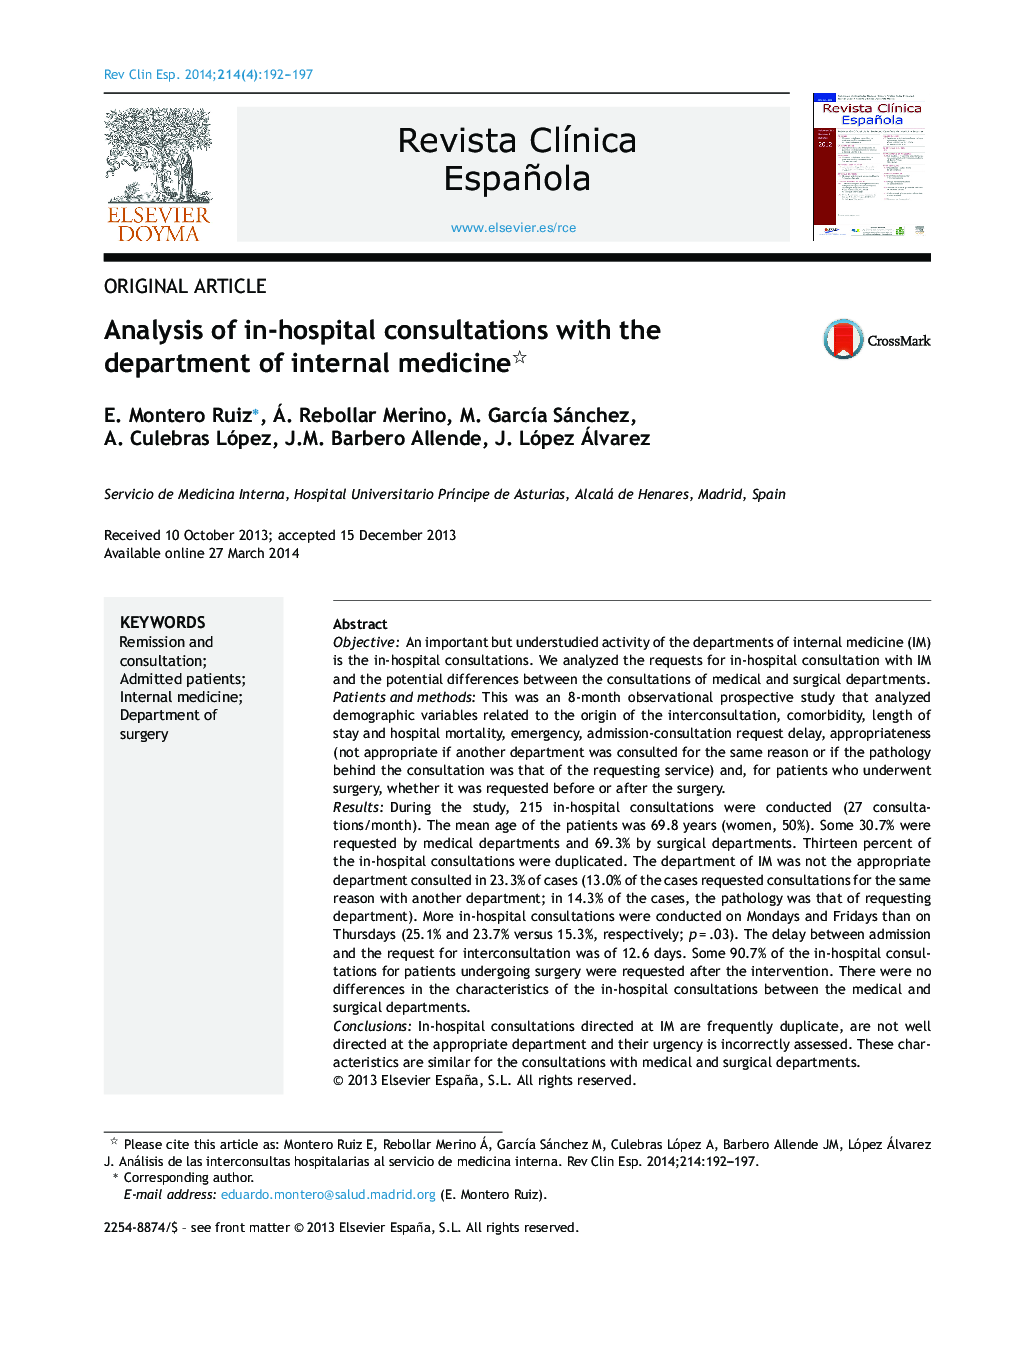 Analysis of in-hospital consultations with the department of internal medicine 